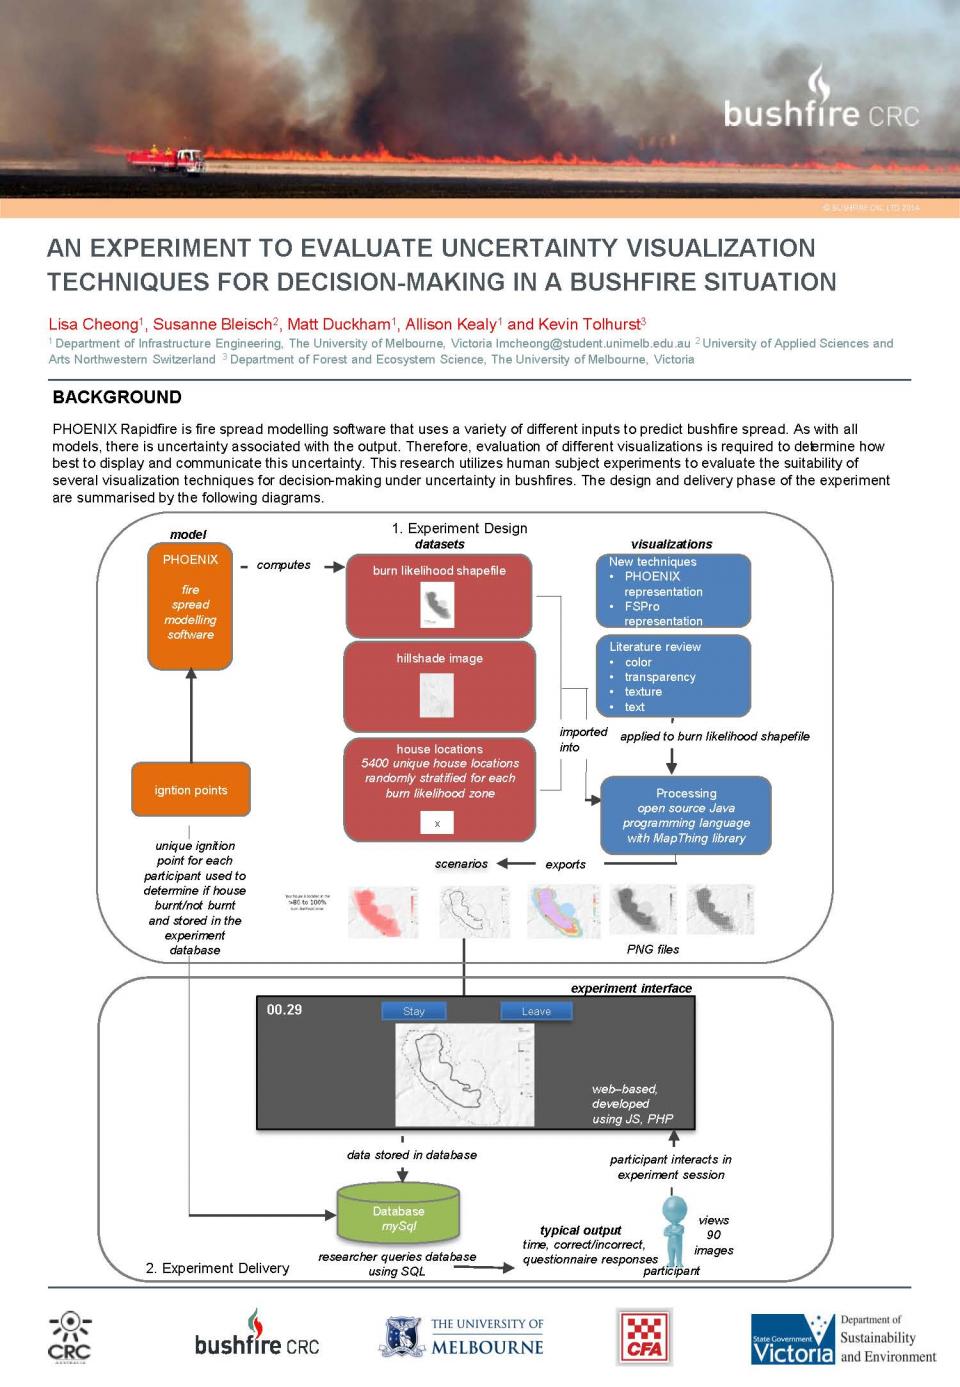 An experiment to evaluate uncertainty visualization techniques for decision-making in a bushfire situation